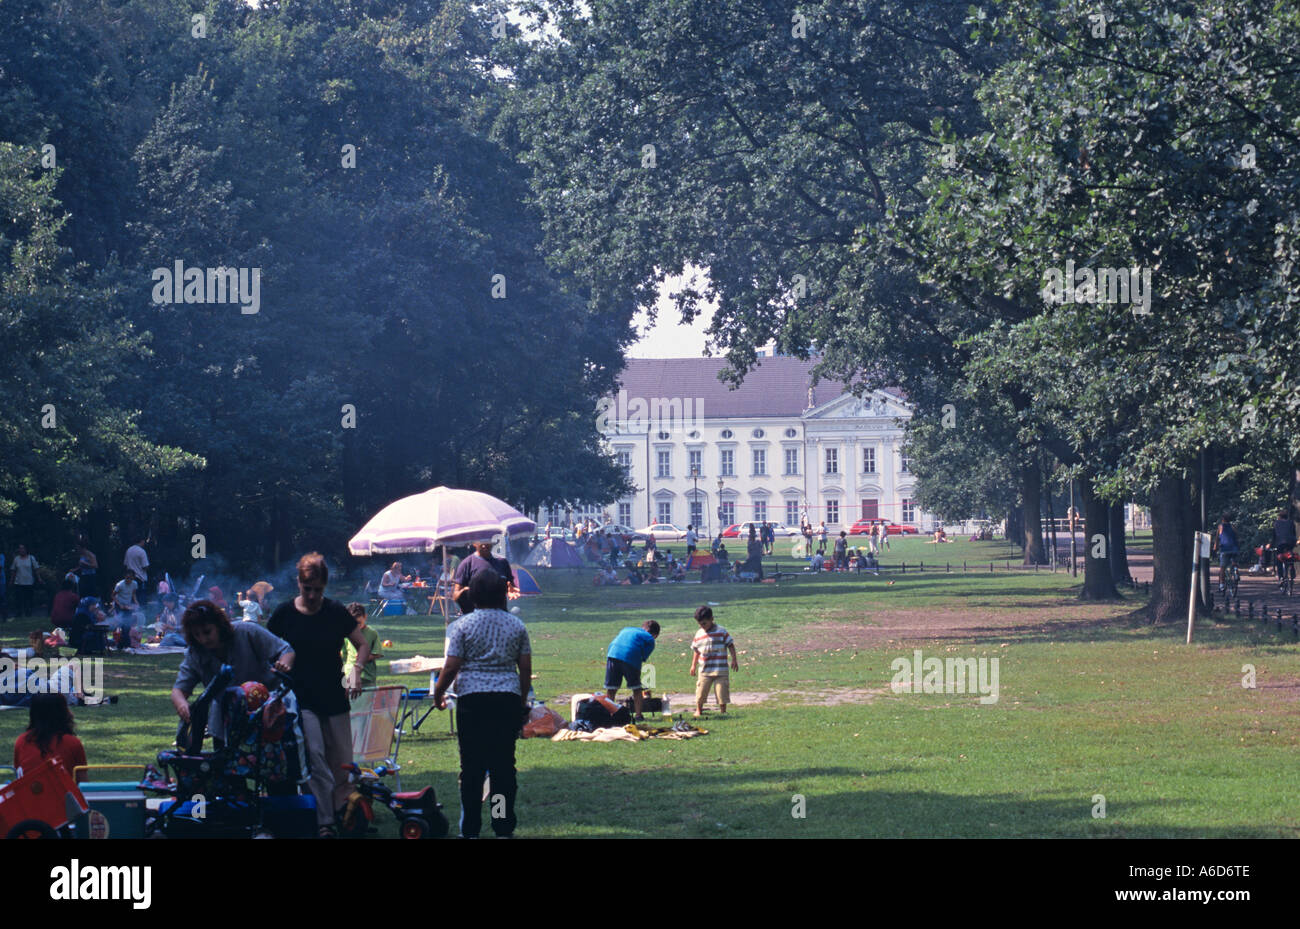 Grillen Im Park High Resolution Stock Photography and Images - Alamy